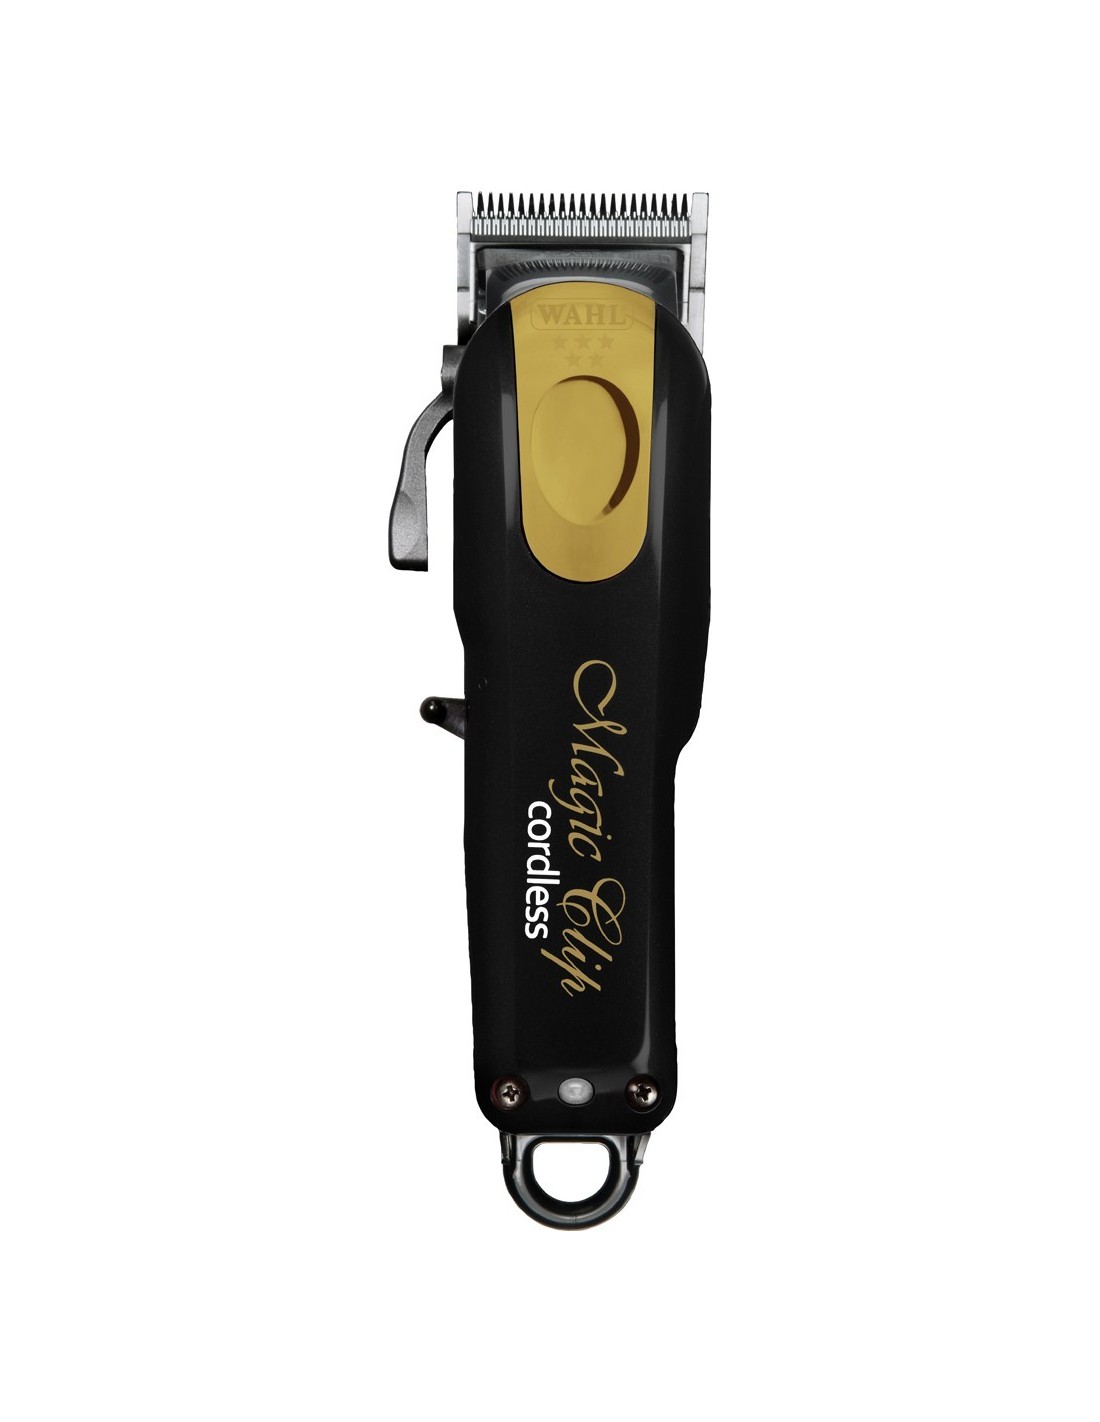 Machine Wahl Magic Clip cordless-Limited Edition